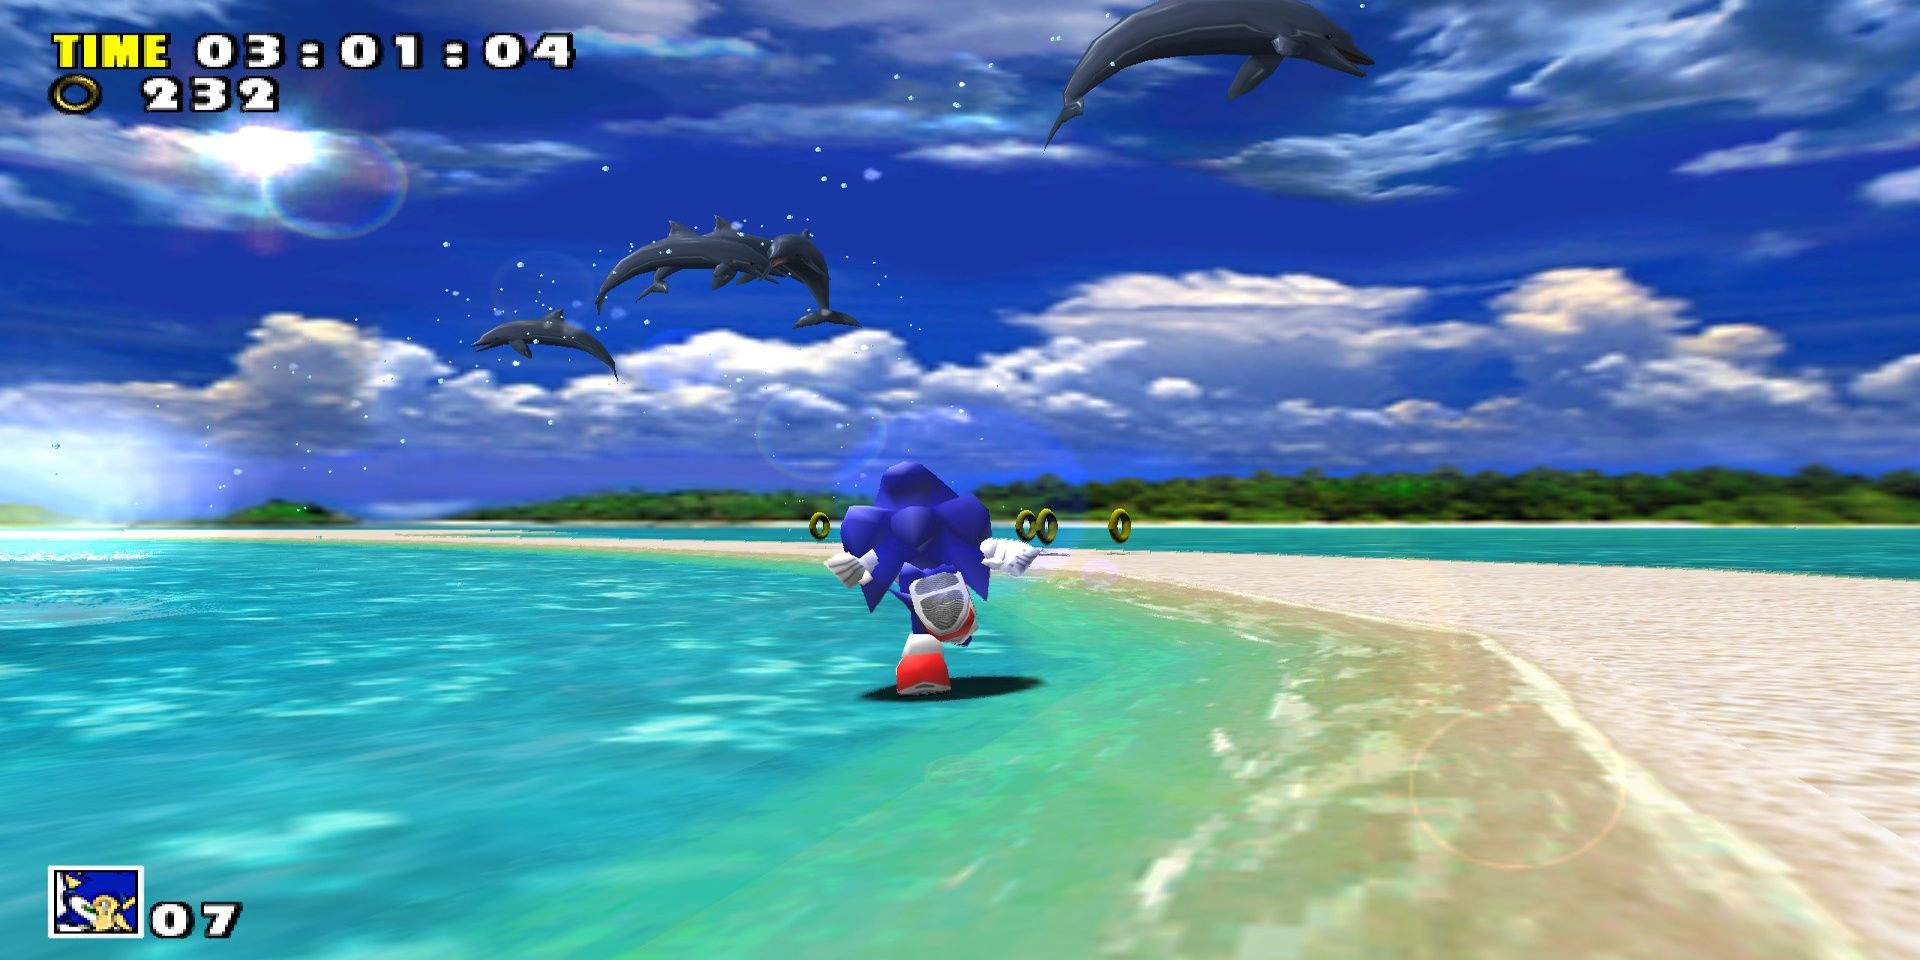 Sonic runs on the beach with dolphins in Sonic Adventure